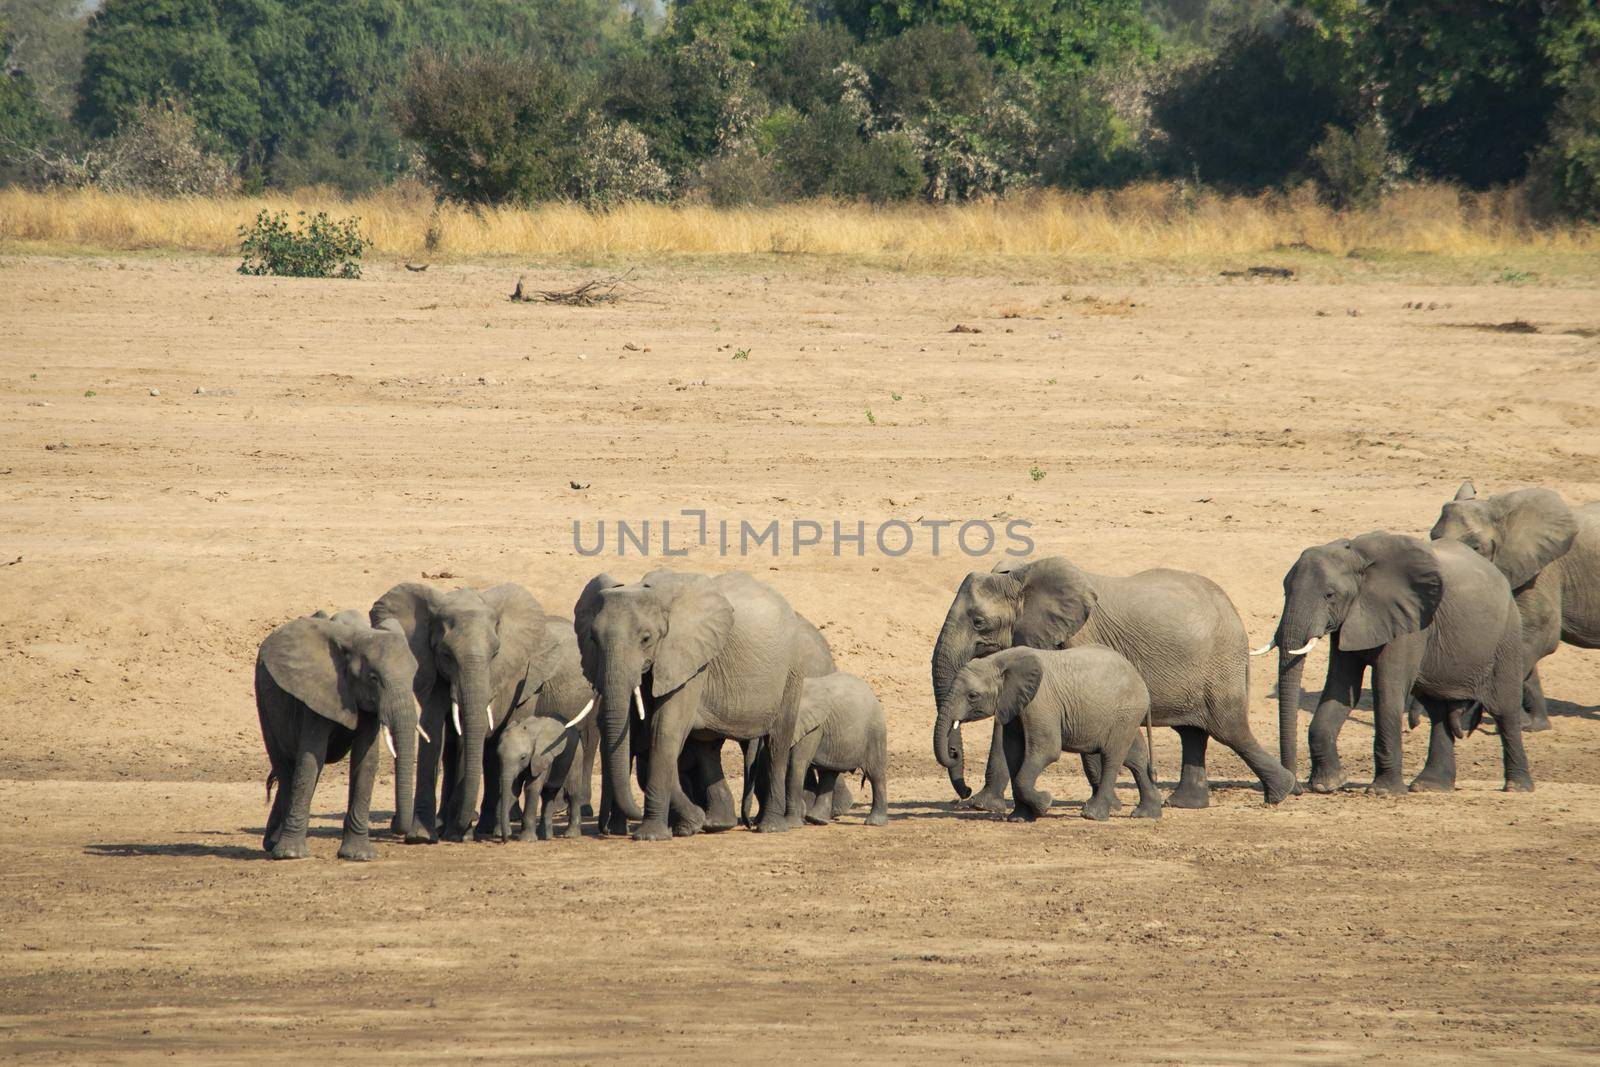 An amazing close up of a elephants family with cubs on the sandy banks of an African river